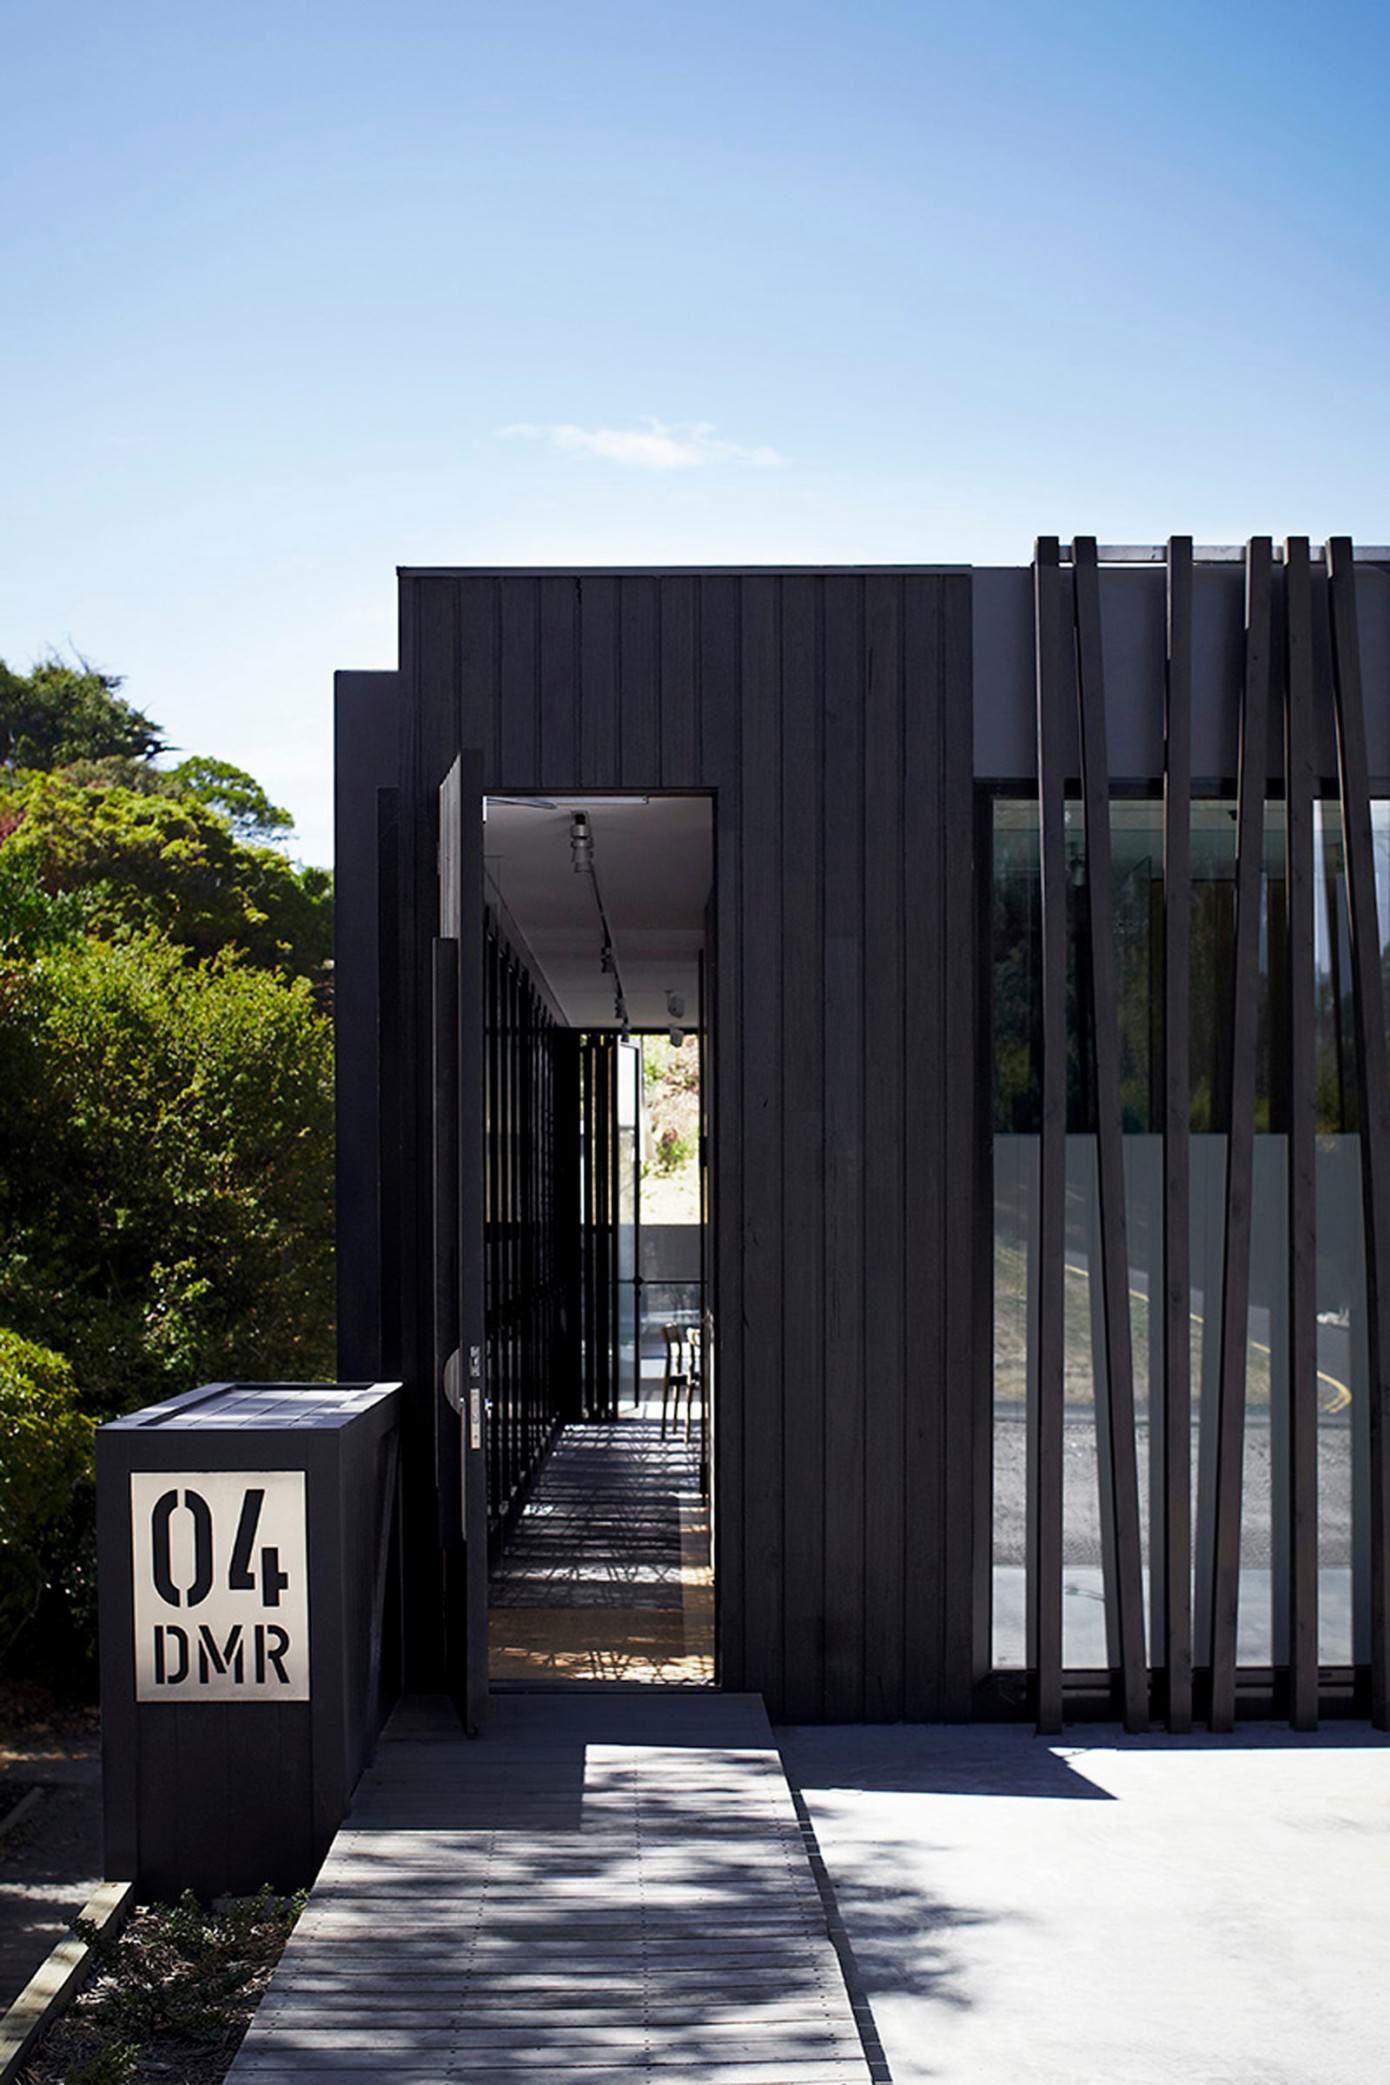 DMR by Whiting Architects